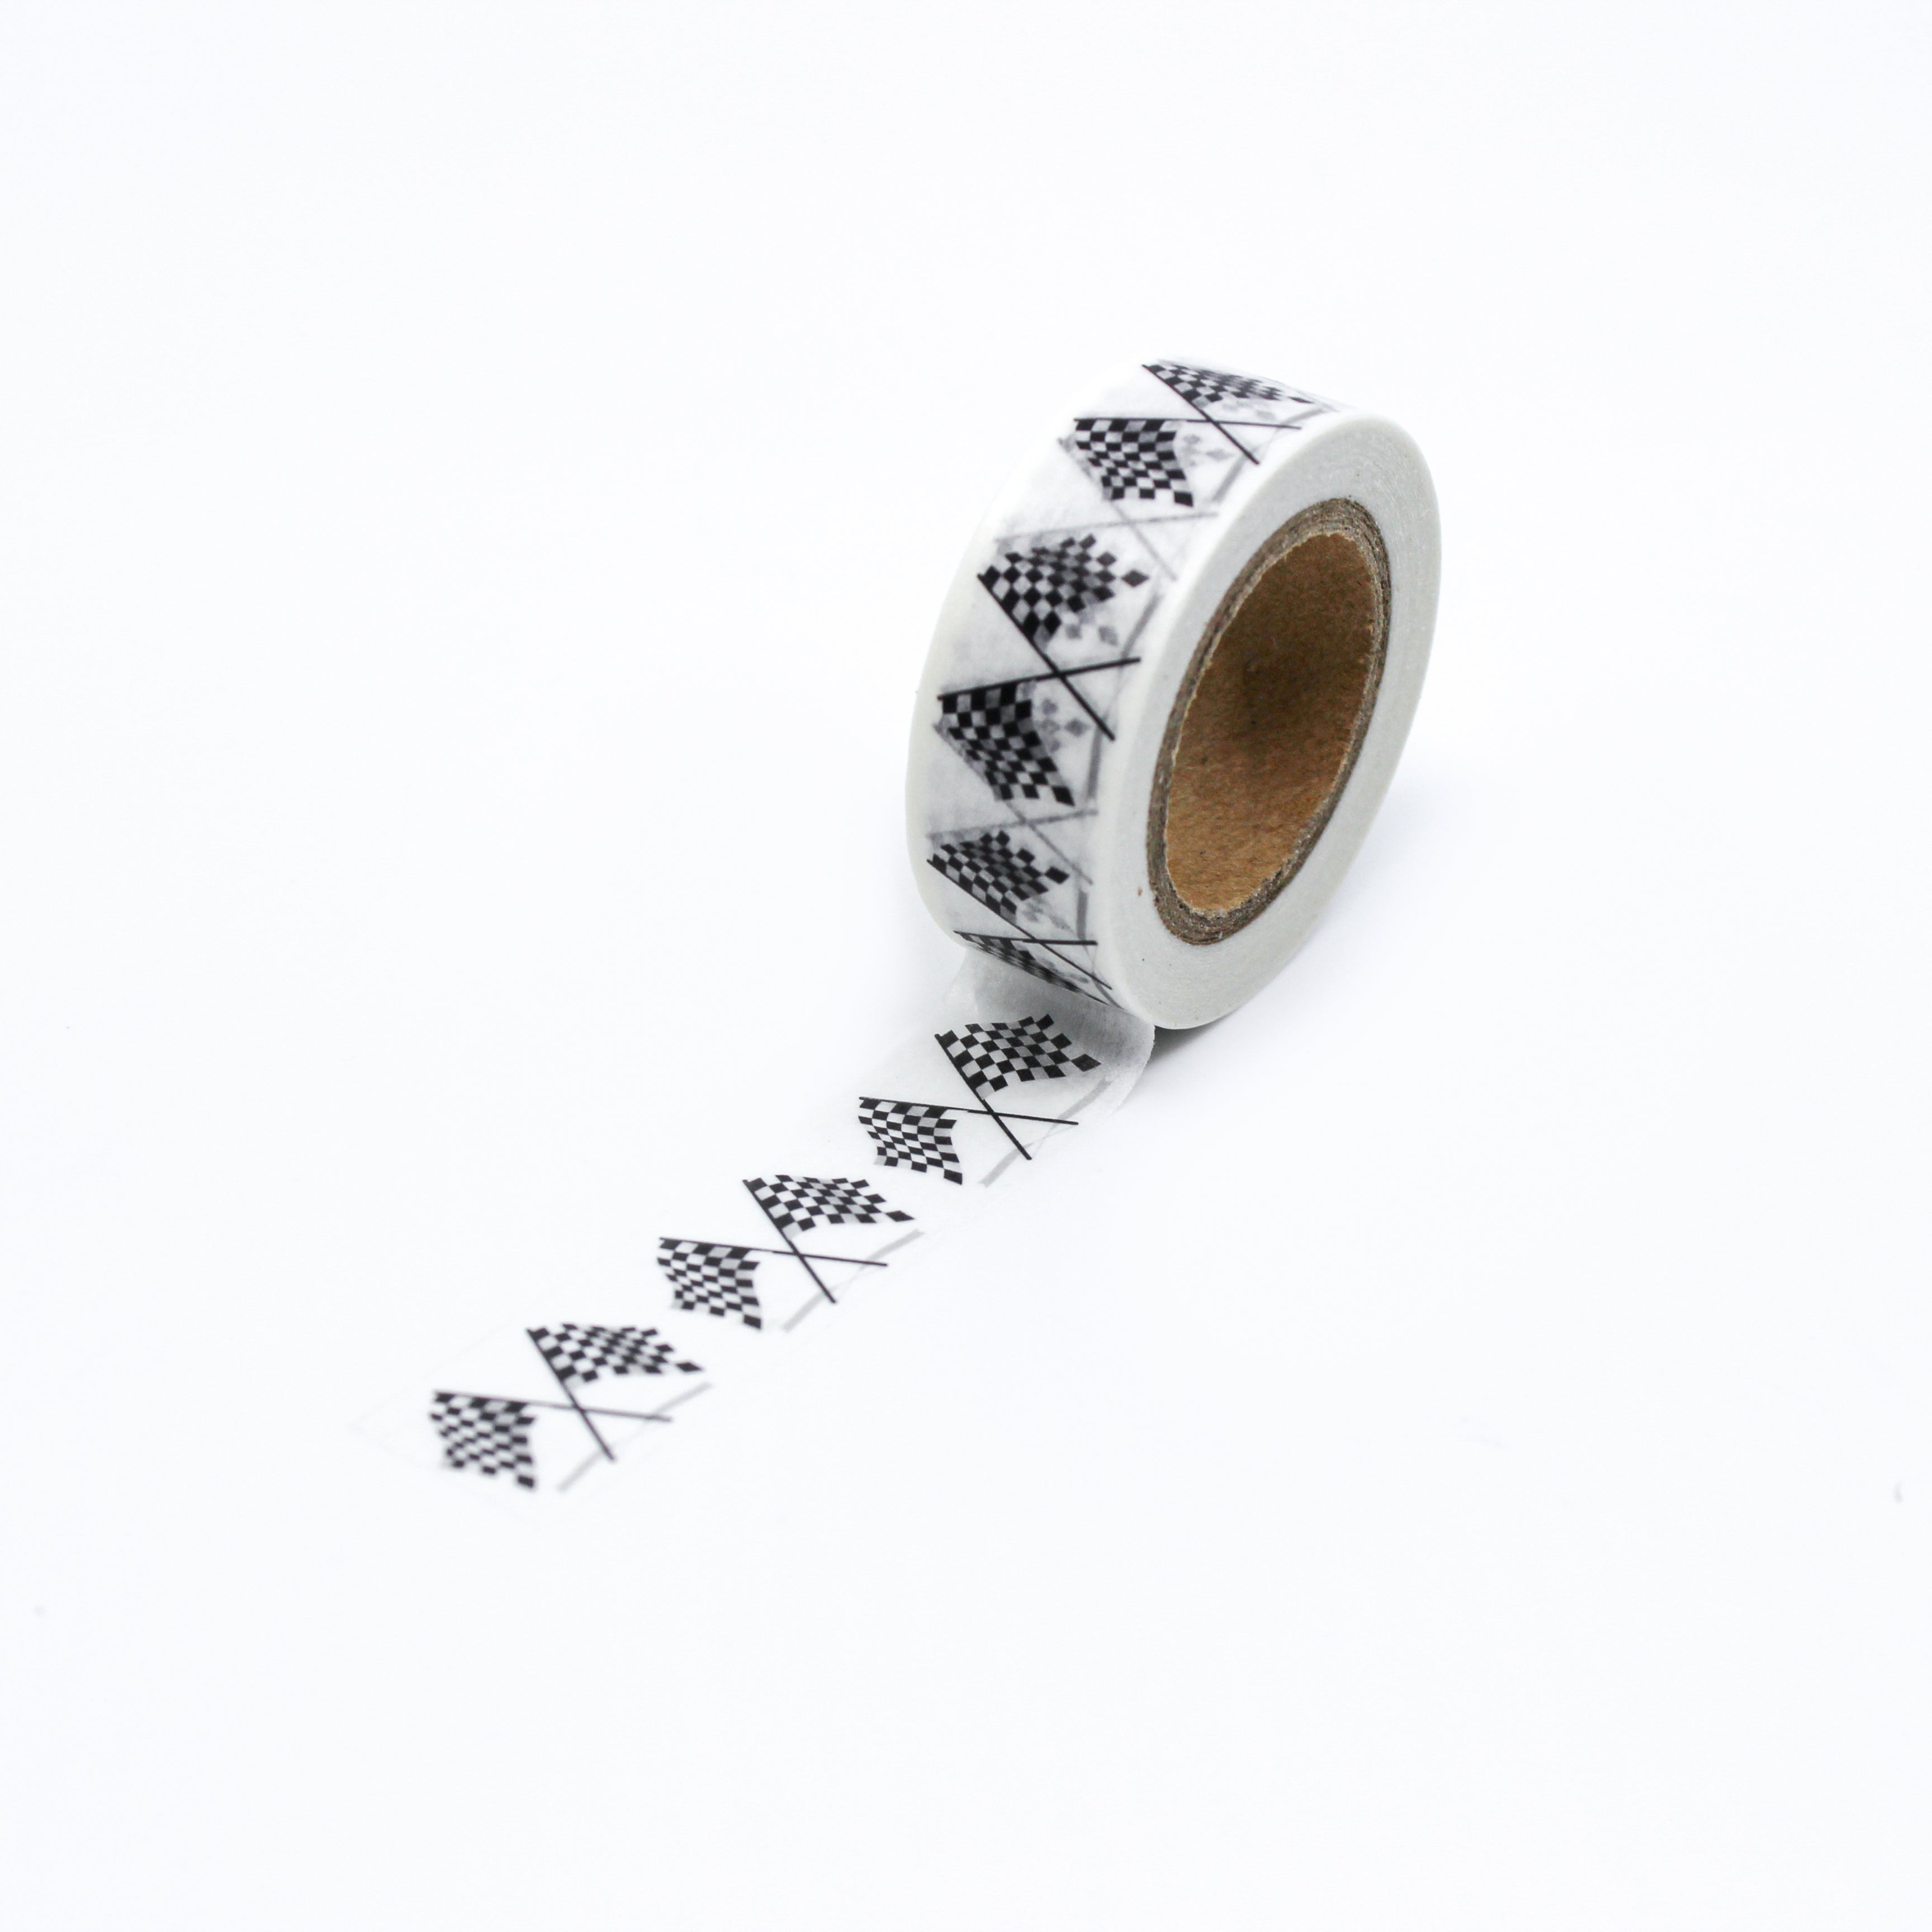 This is a full pattern repeat view of black and white racing car flags washi tape from BBB Supplies Craft Shop